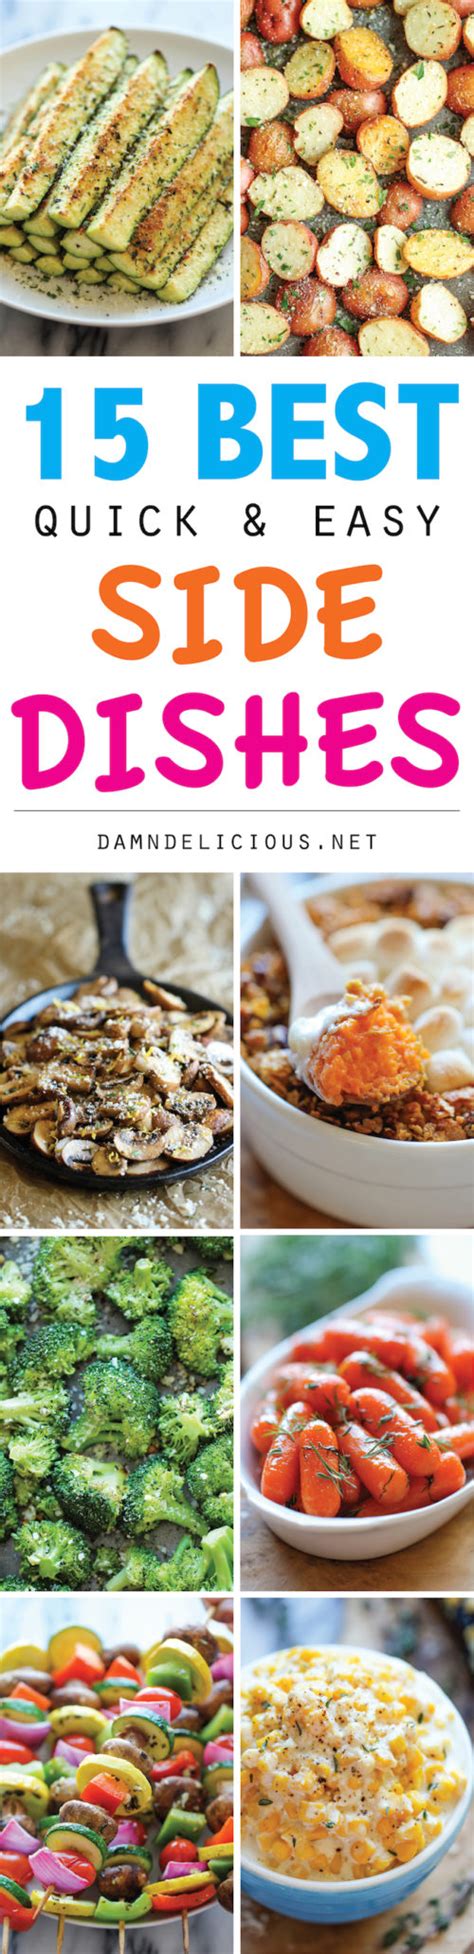 15 Best Quick And Easy Side Dishes Damn Delicious